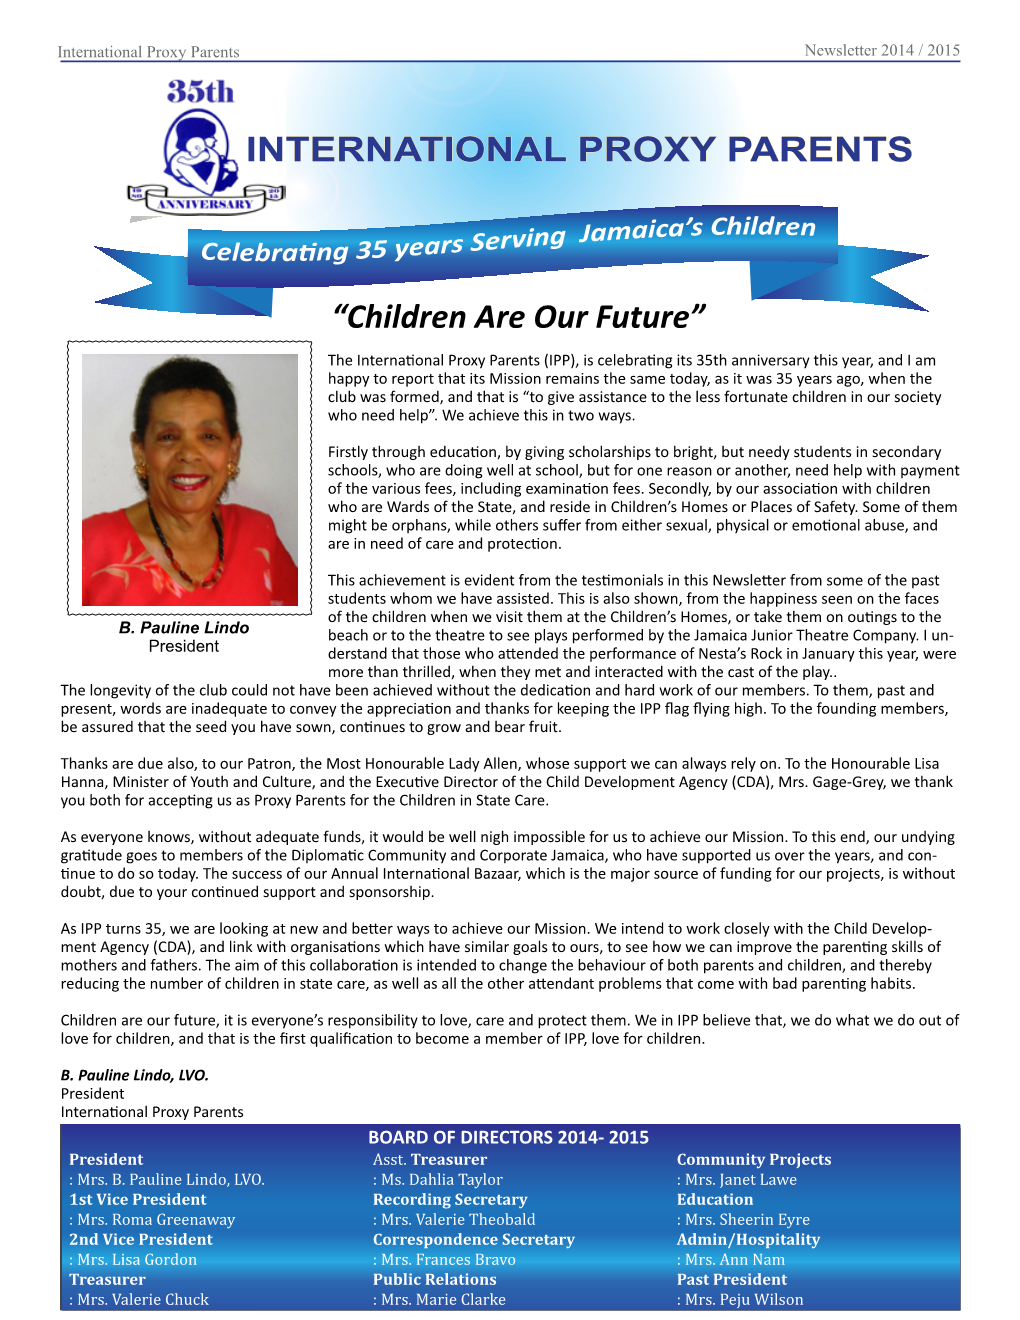 INTERNATIONAL PROXY PARENTS “Children Are Our Future”